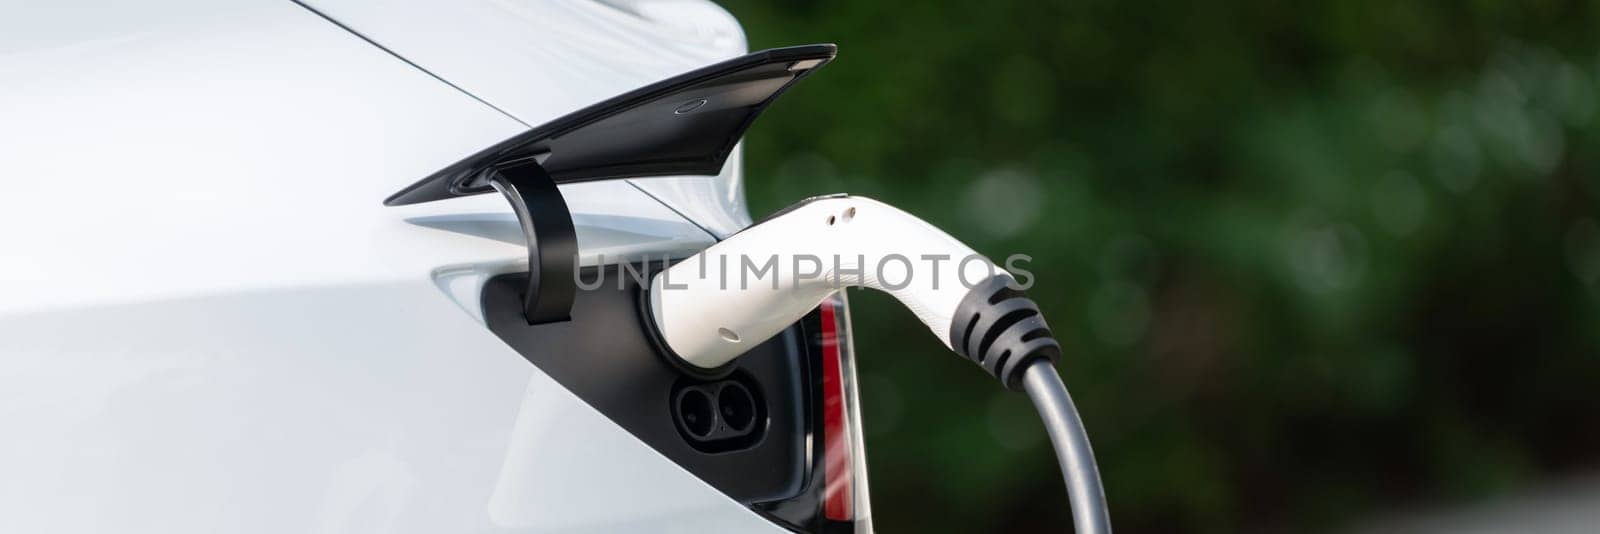 Closeup EV charger plug handle attached to electric vehicle port. Synchronos by biancoblue